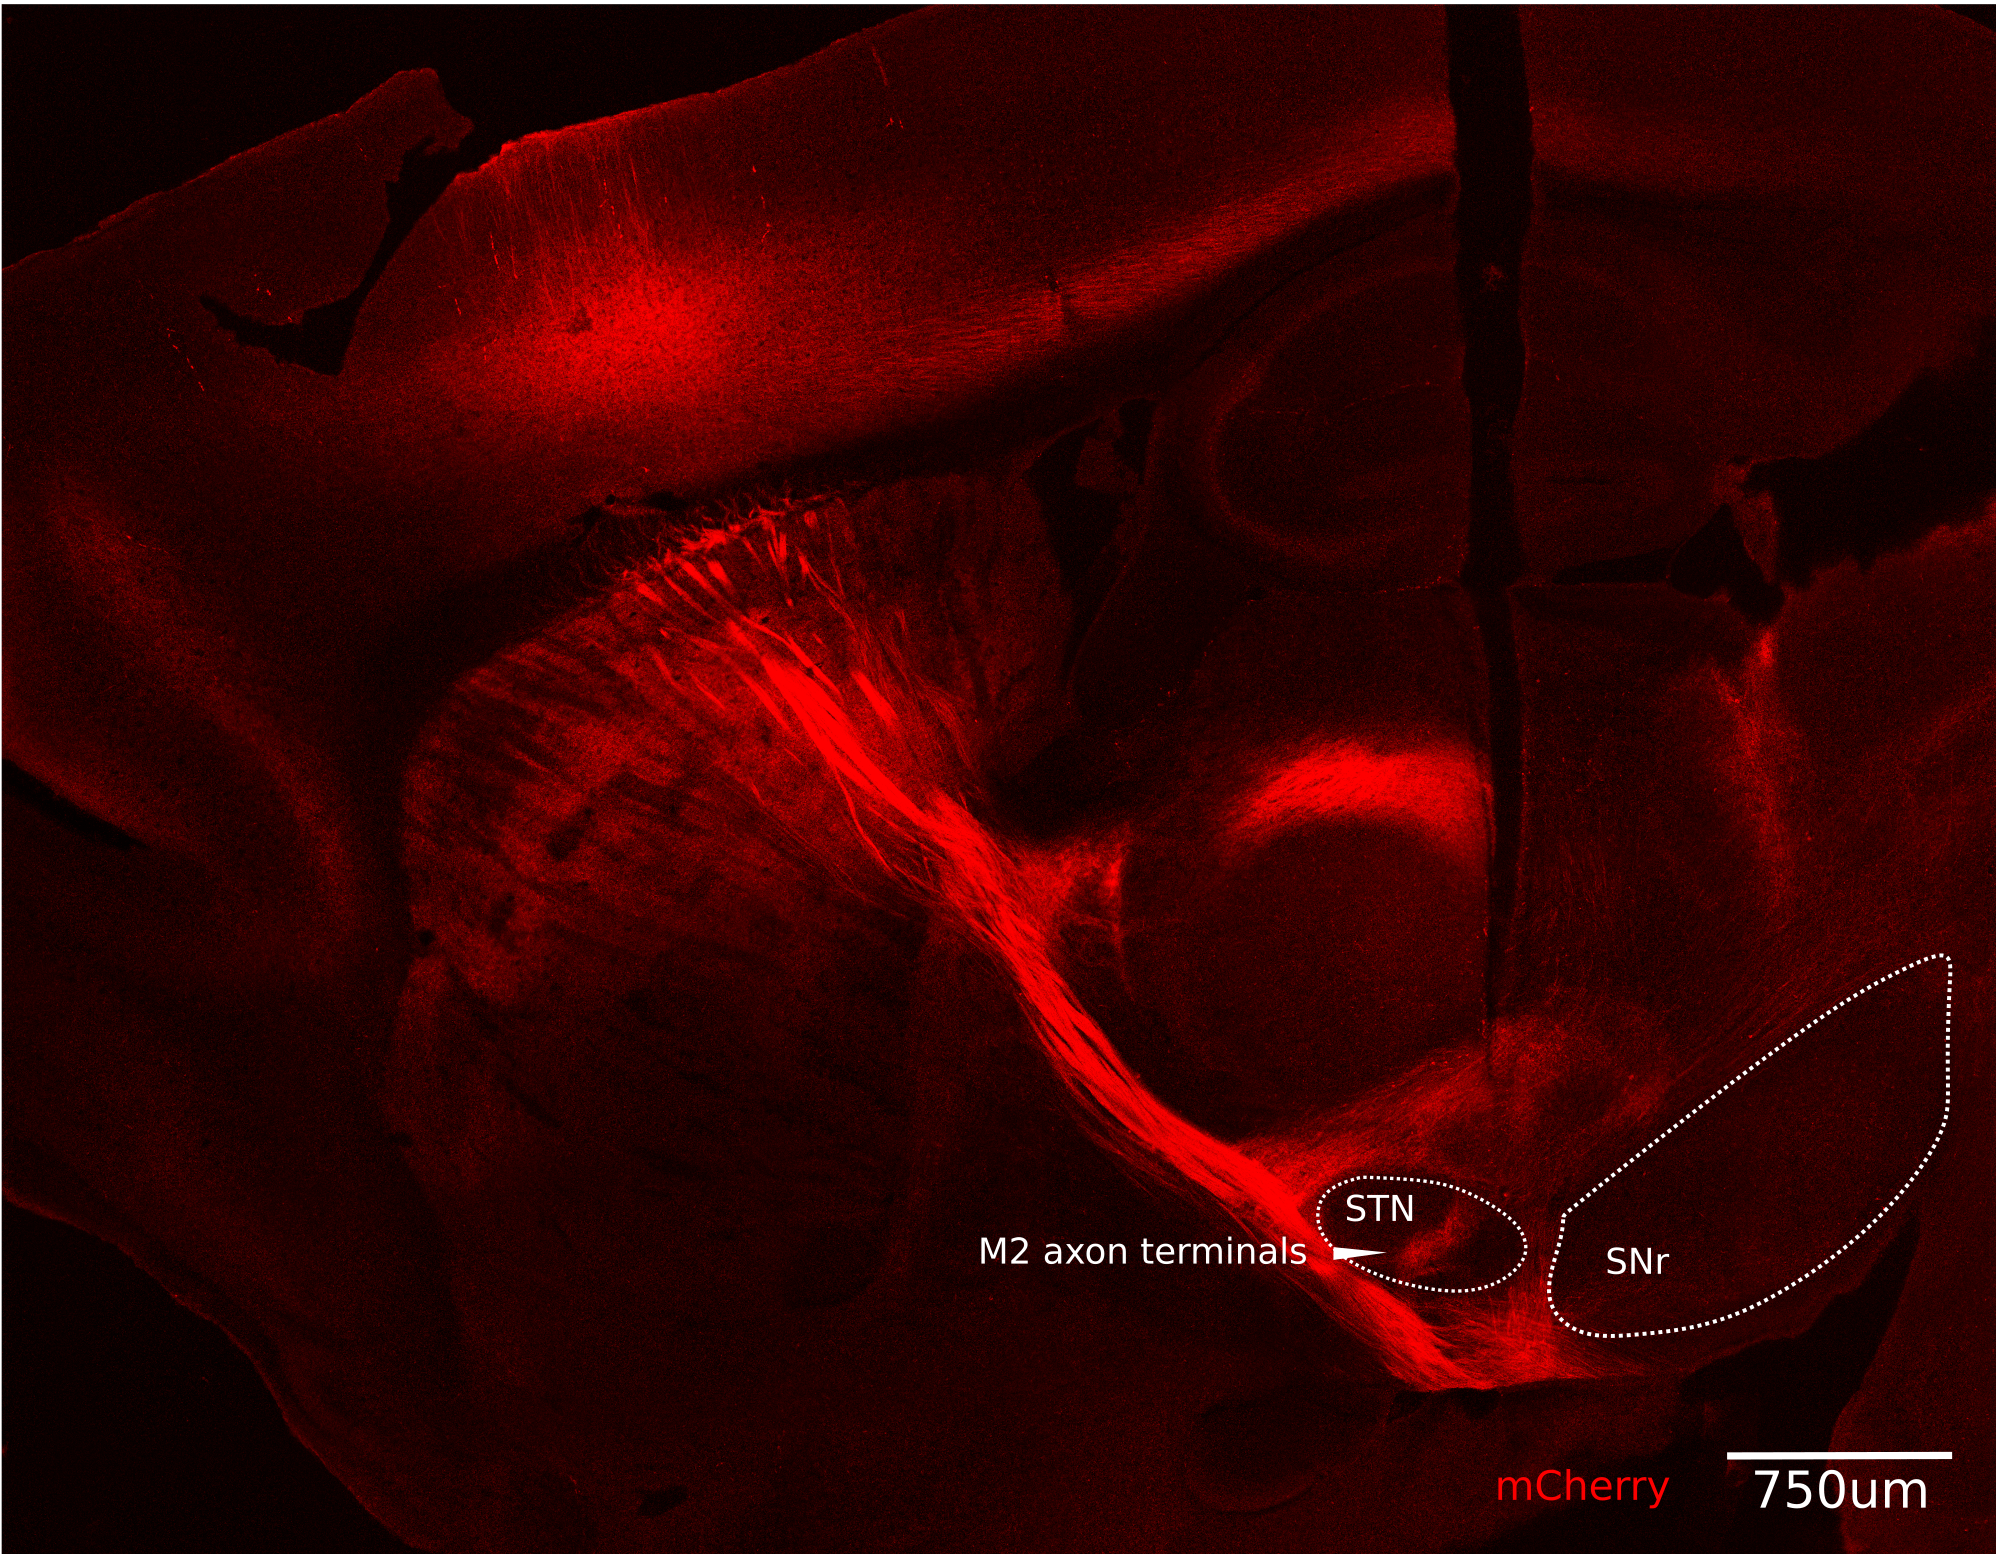 On a black background we see a large section of mouse brain highlighted in red. In particular there is a bundle of long red lines tracing from the upper left down to a region marked with white letters STN